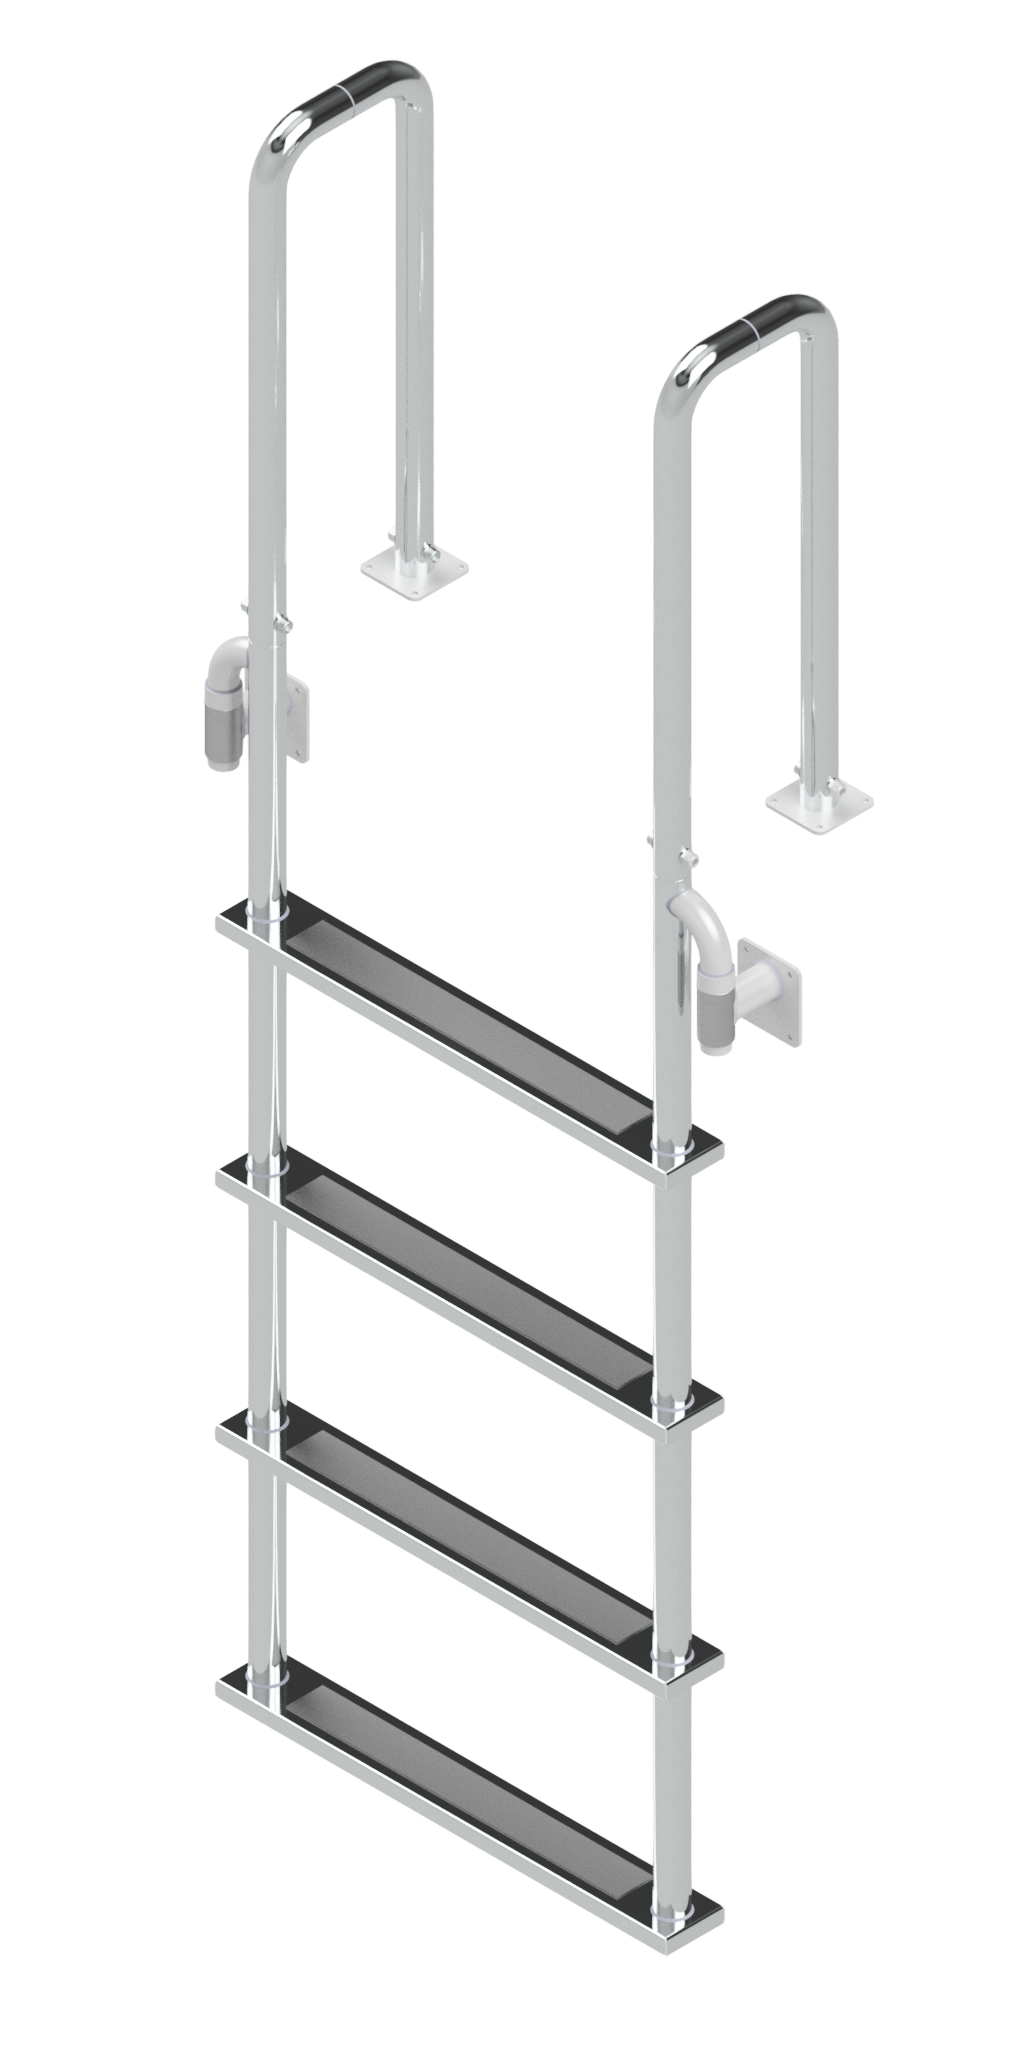 L-1212-LB Four-Step Stainless Steel Dock Ladder, Front Mount with Detachable Mounting Flanges - 8" Handles